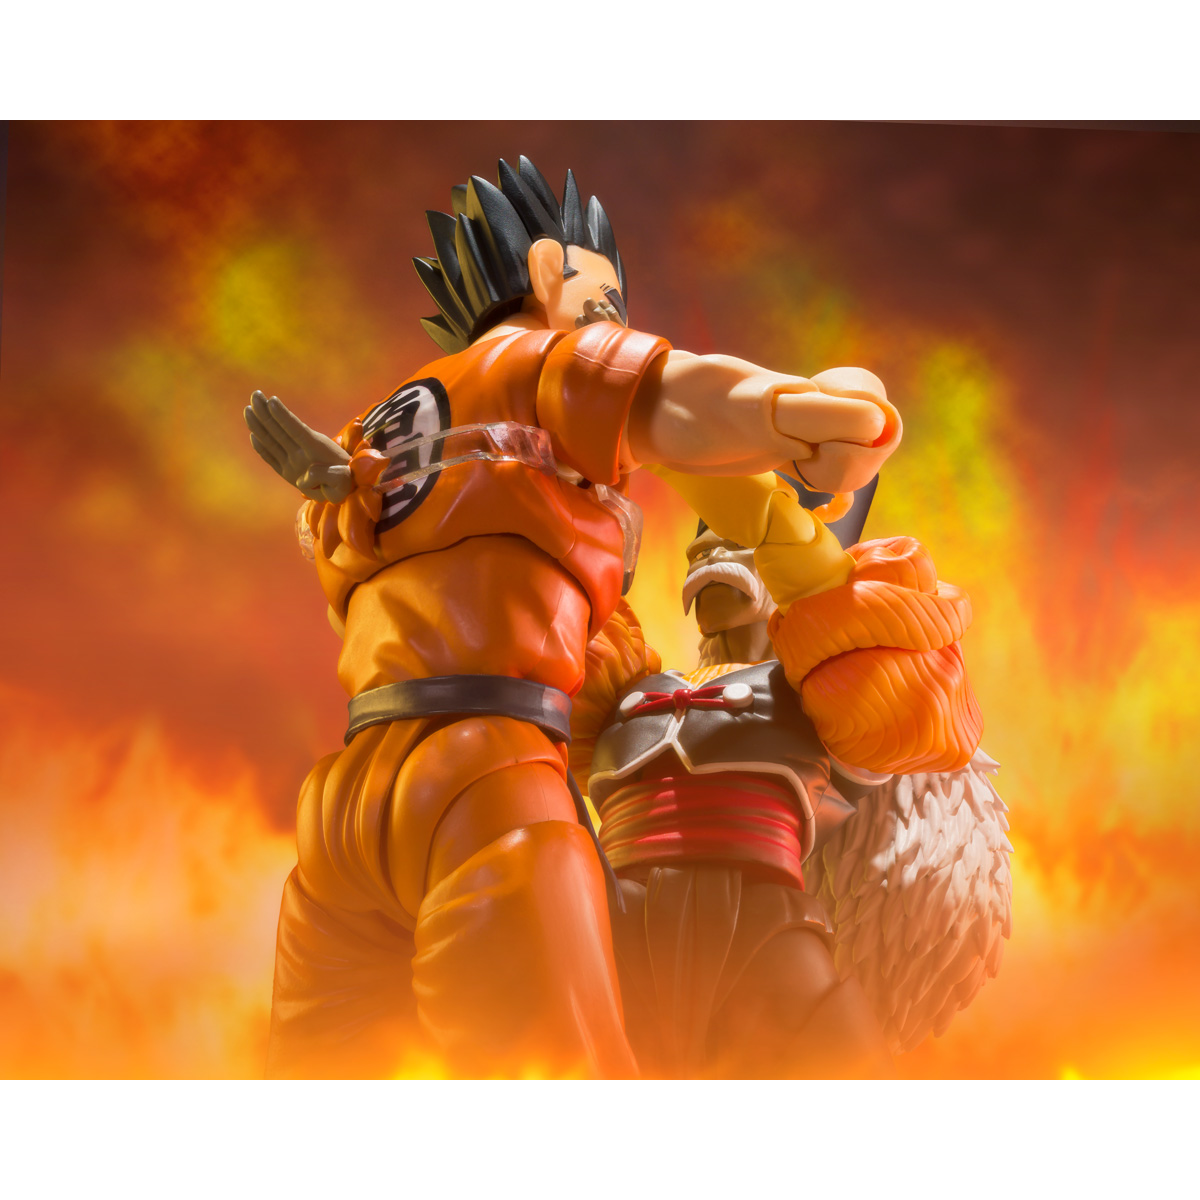 #DragonBall fans! Our newest item, S.H.Figuarts YAMCHA -EARTH'S FOREMOST FIGHTER-, is now available for pre-order on Premium Bandai. Check out the details at the link below. 

- S.H.Figuarts YAMCHA -EARTH'S FOREMOST FIGHTER-

ow.ly/Kb1o50OQTPn
Grab yours today!